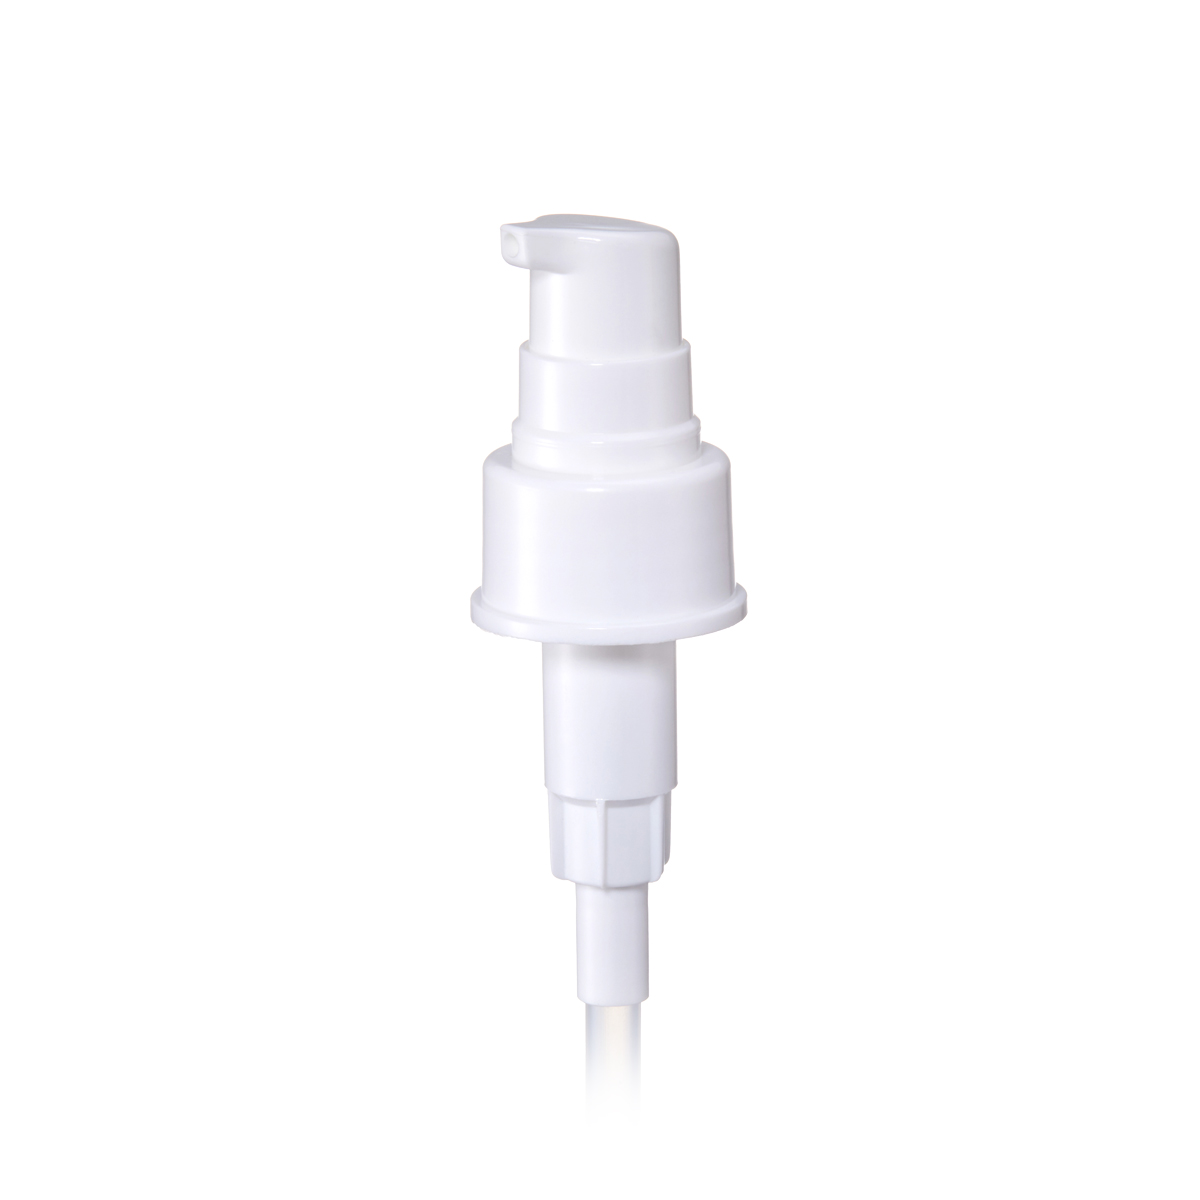 Cosmetic Pump Suppliers